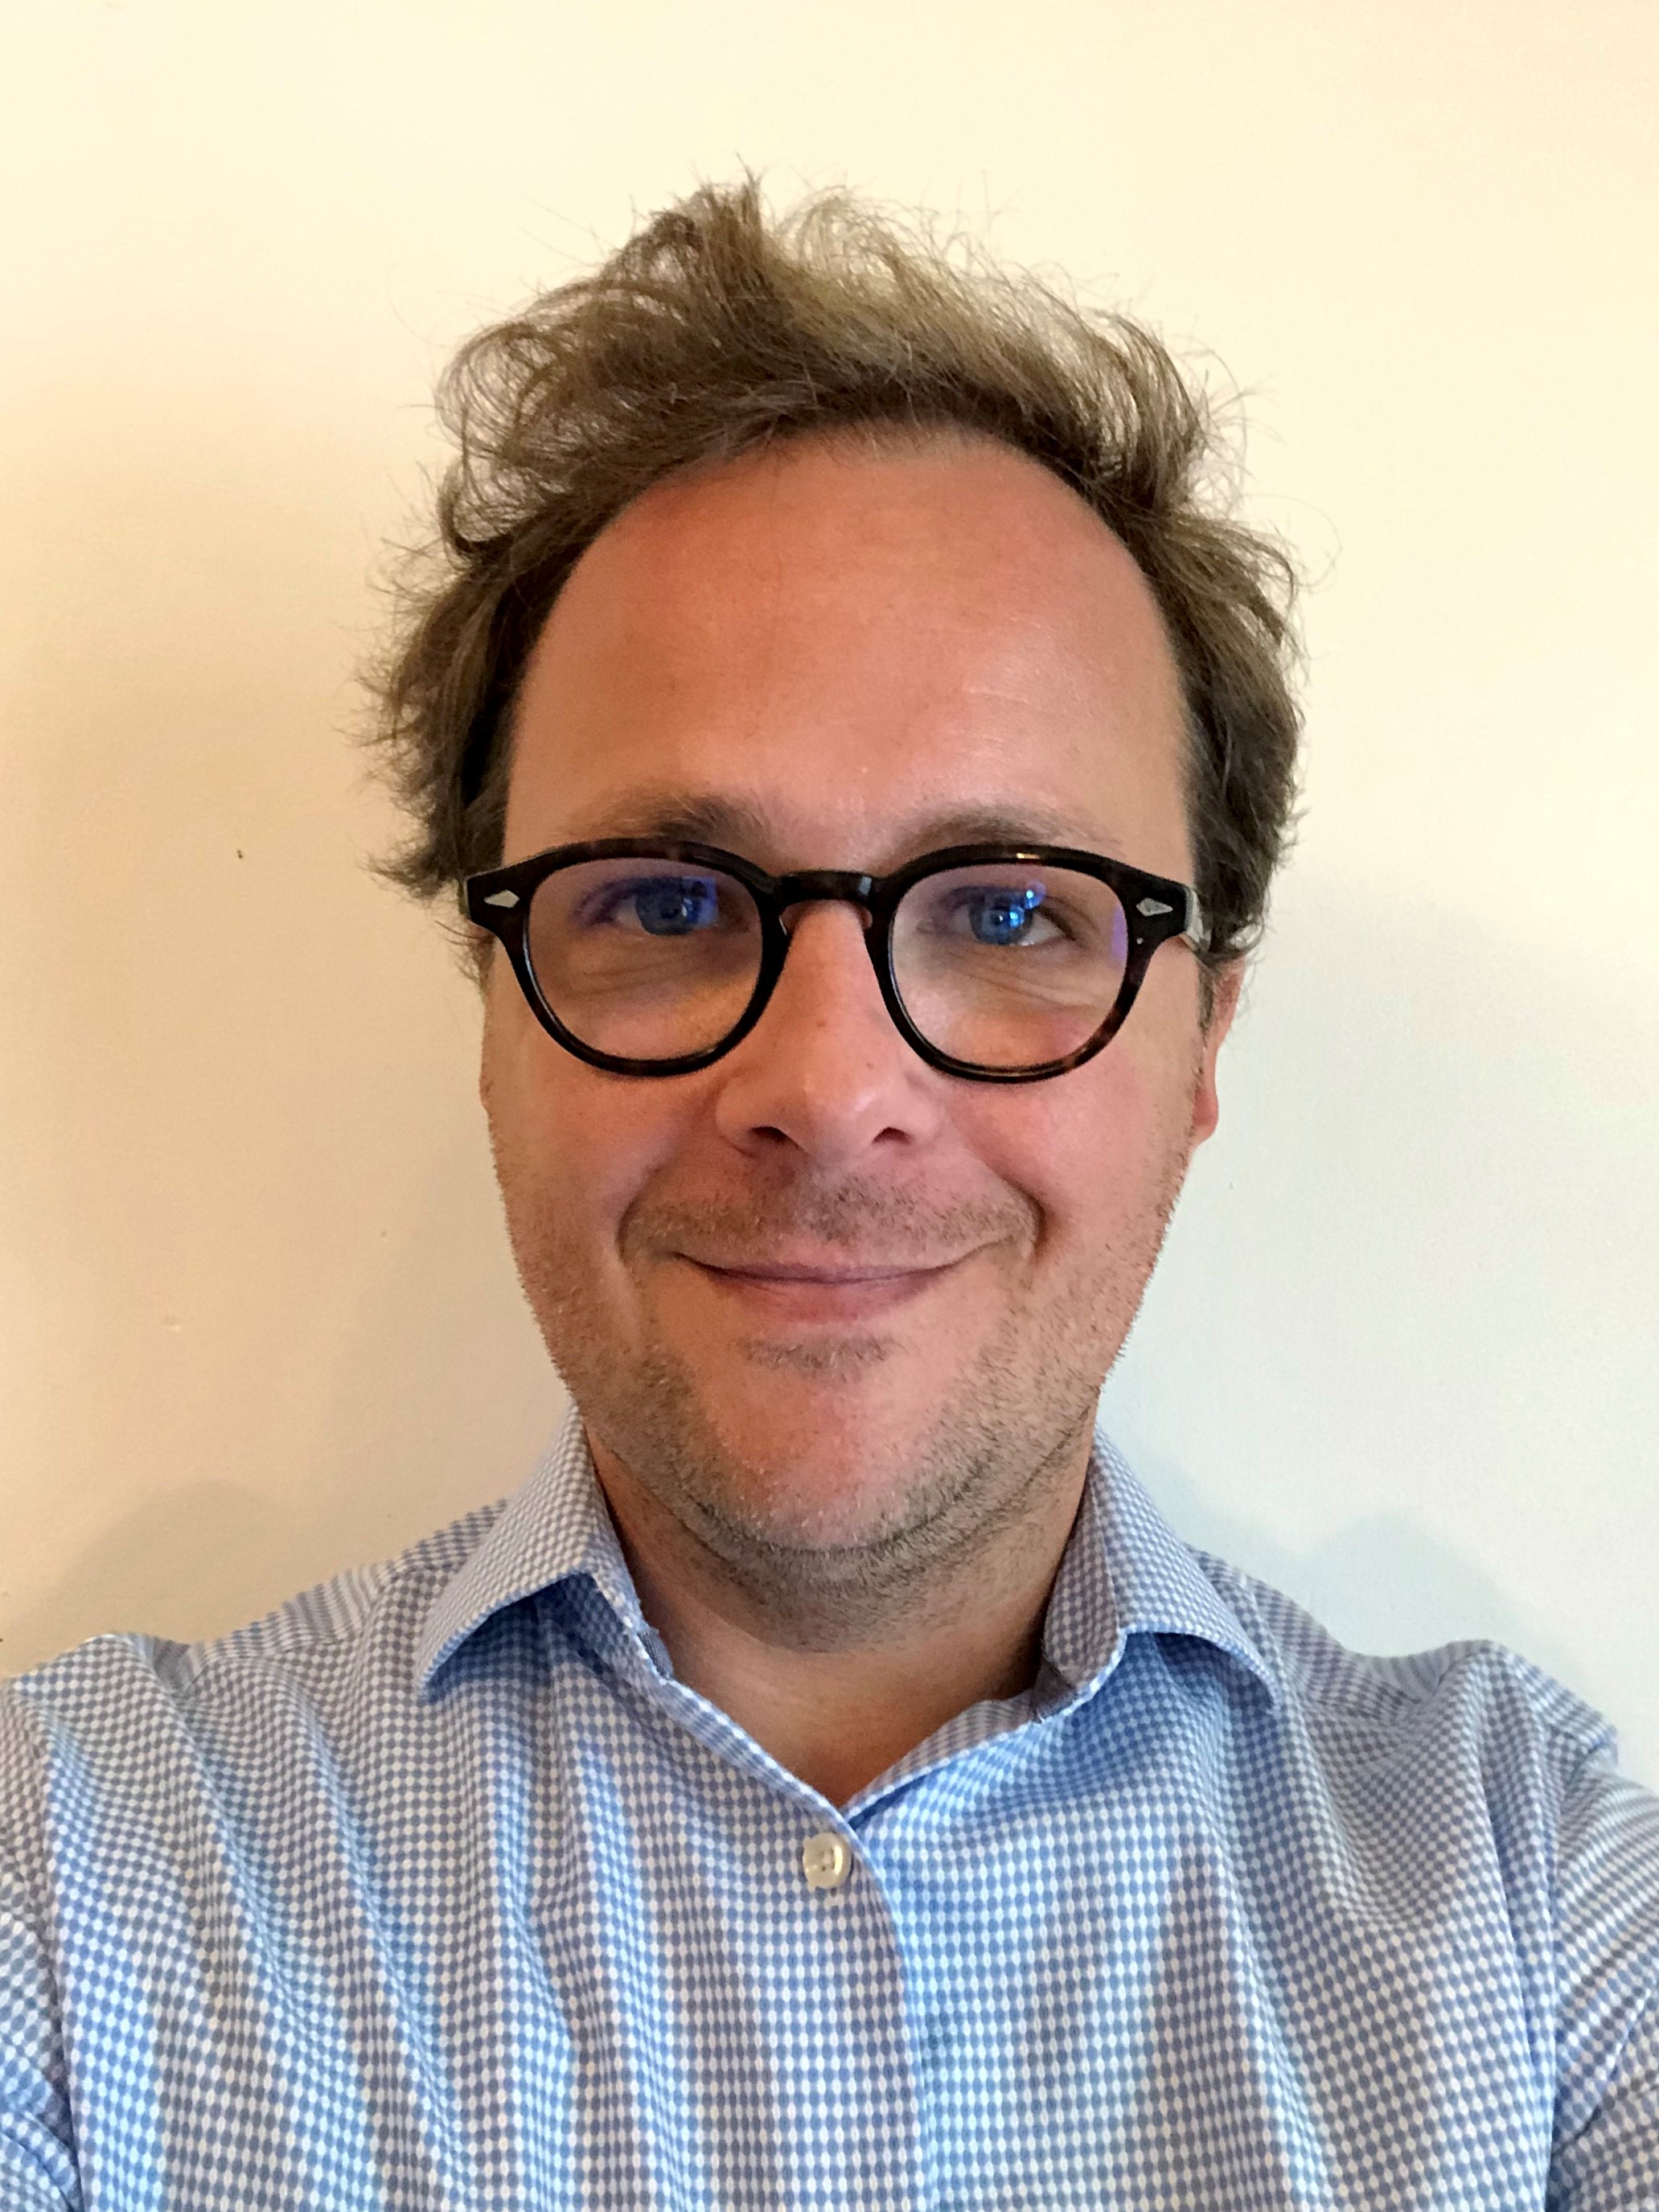 MKS Instruments increases its presence in France: Wilfried Vogel joins Ophir® as sales manager